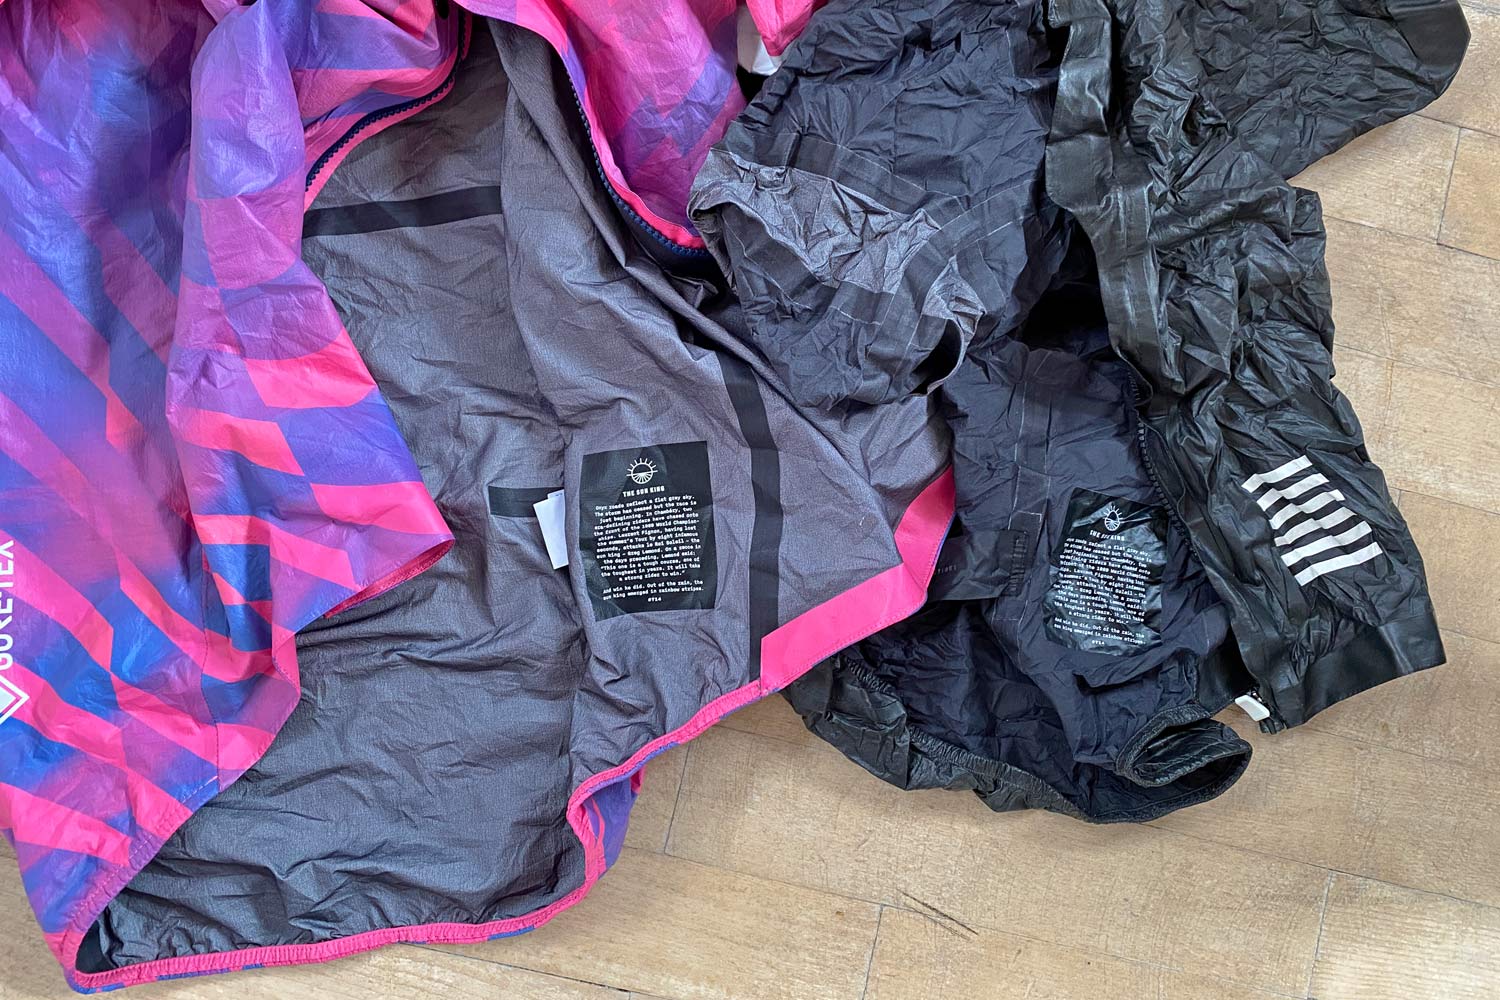 Exclusive Review: Rapha Pro Team Lightweight Gore-Tex Jacket printed in pink Technicolor, extra full color Shakedry visibility, pink vs. black